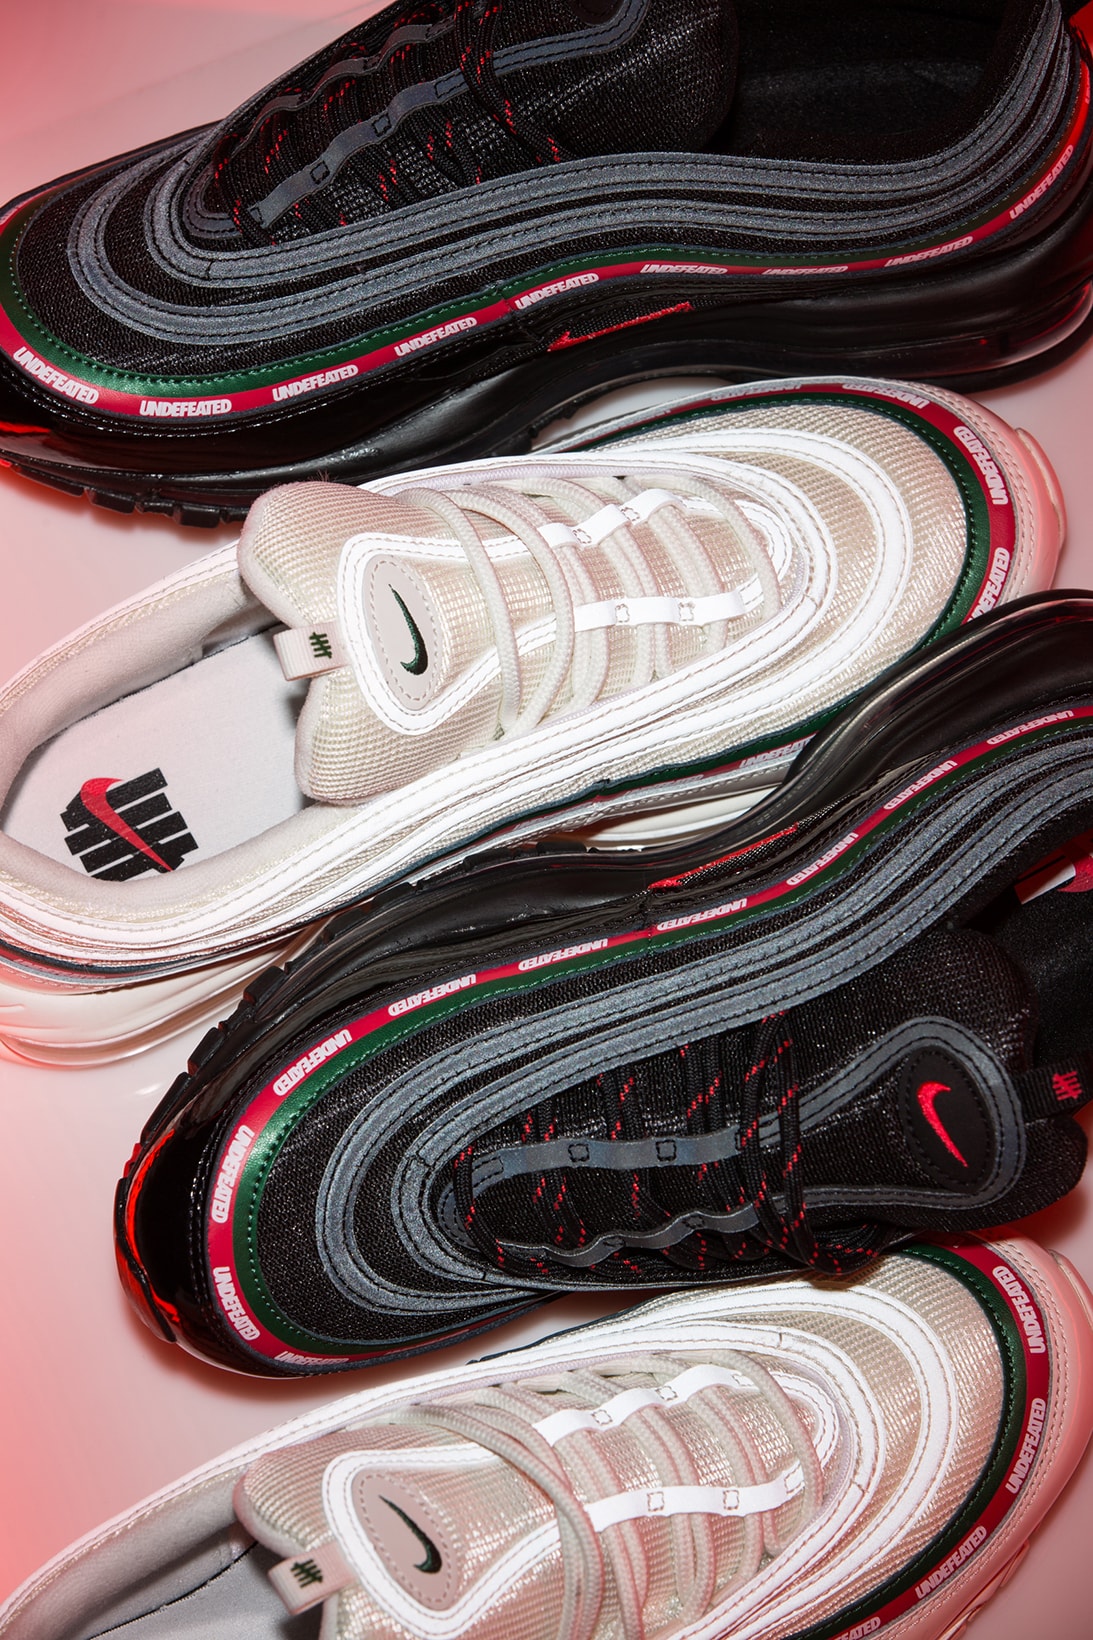 UNDEFEATED Nike Air Max 97 Matching Apparel Hoodie Sweatshirt T Shirt Tee Bag Socks 2017 September 15 Release Date Info Sneakers Shoes Footwear gucci red green white black